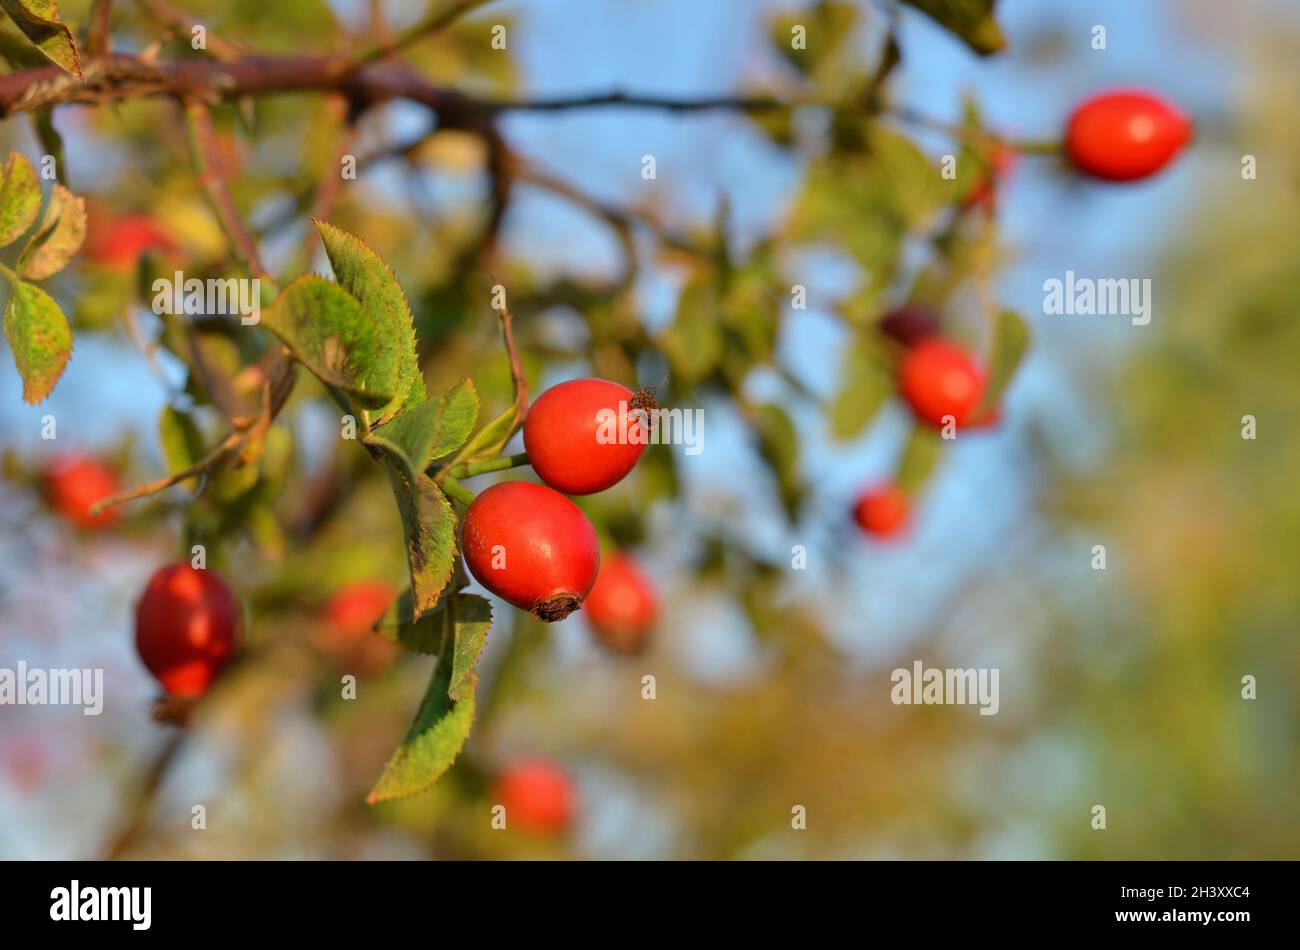 Red rose hip fruits on a bush in autumn outdoors. Rosehip fruits are valuable medicinal raw materials with a high content of vitamin C. Stock Photo